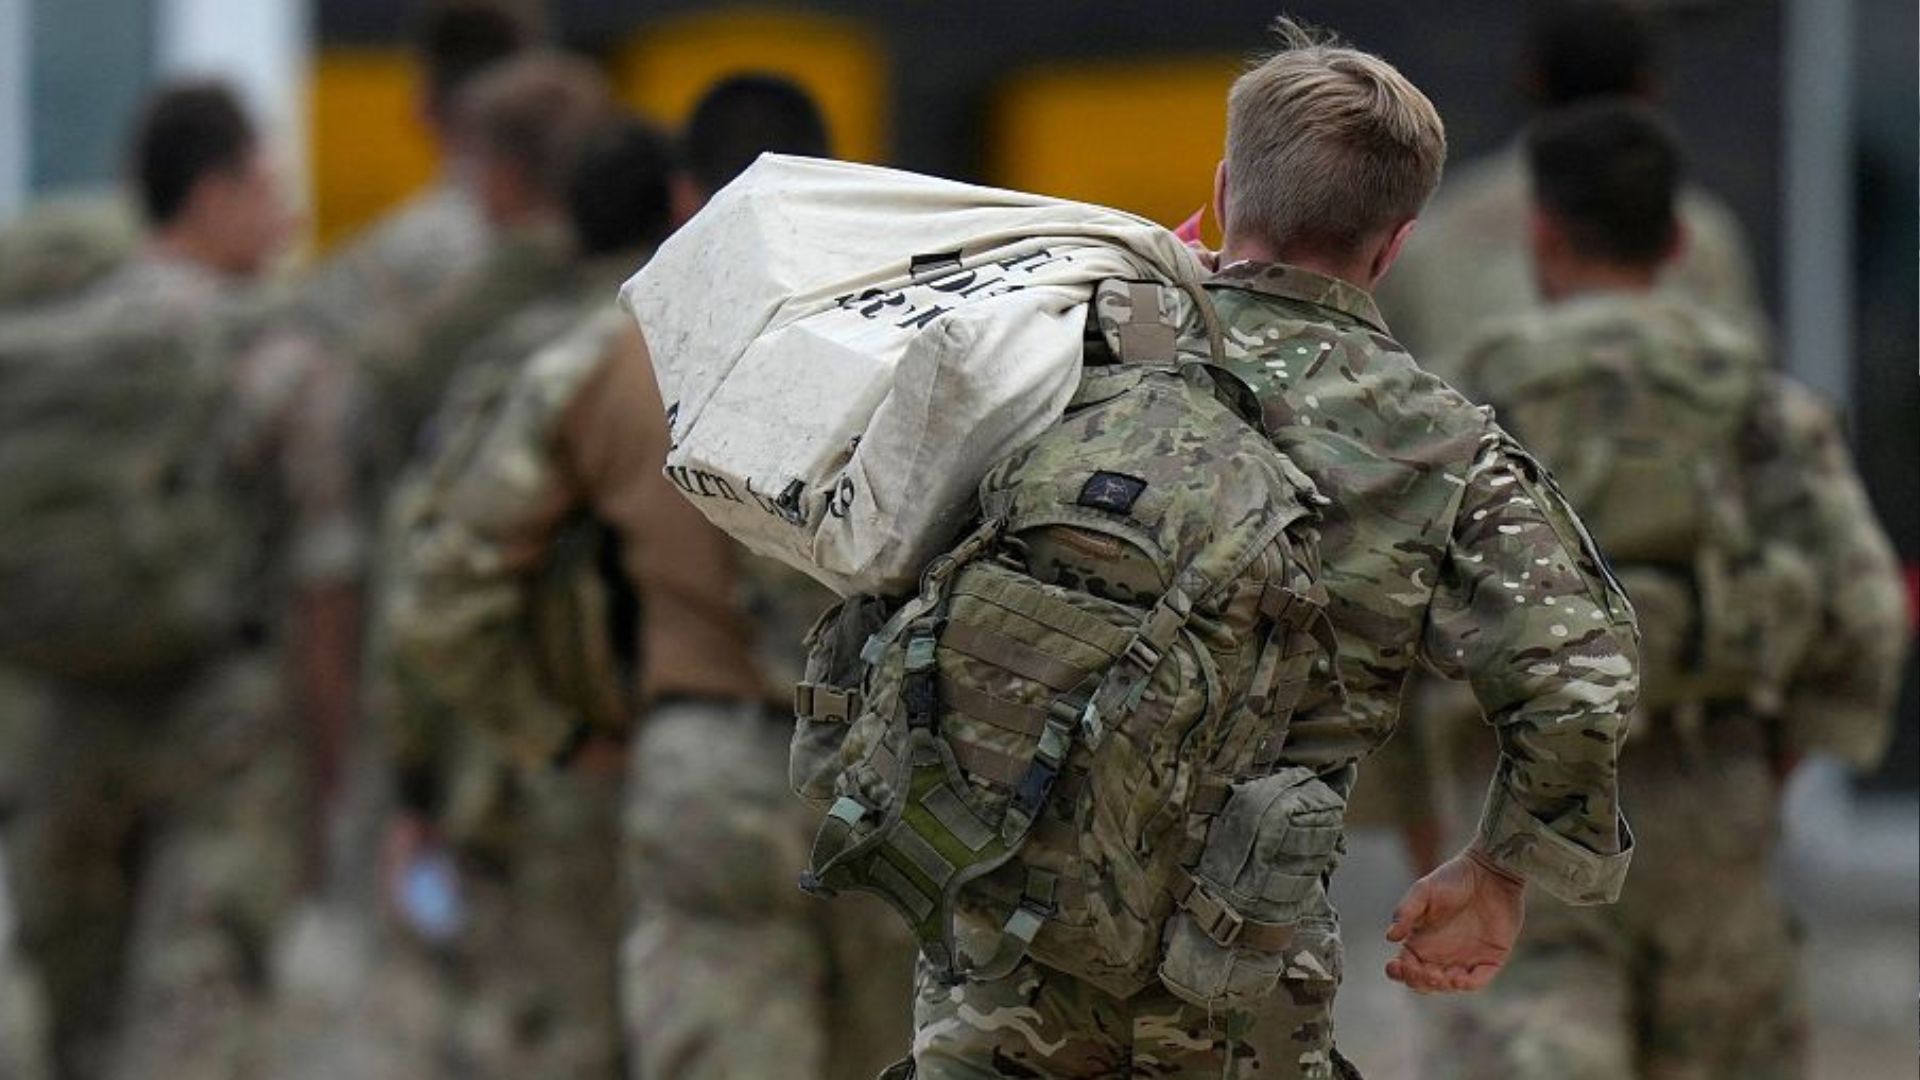 The head of the UK army says the number of professional soldiers has halved over the last 30 years / Alastair Grant / CFP